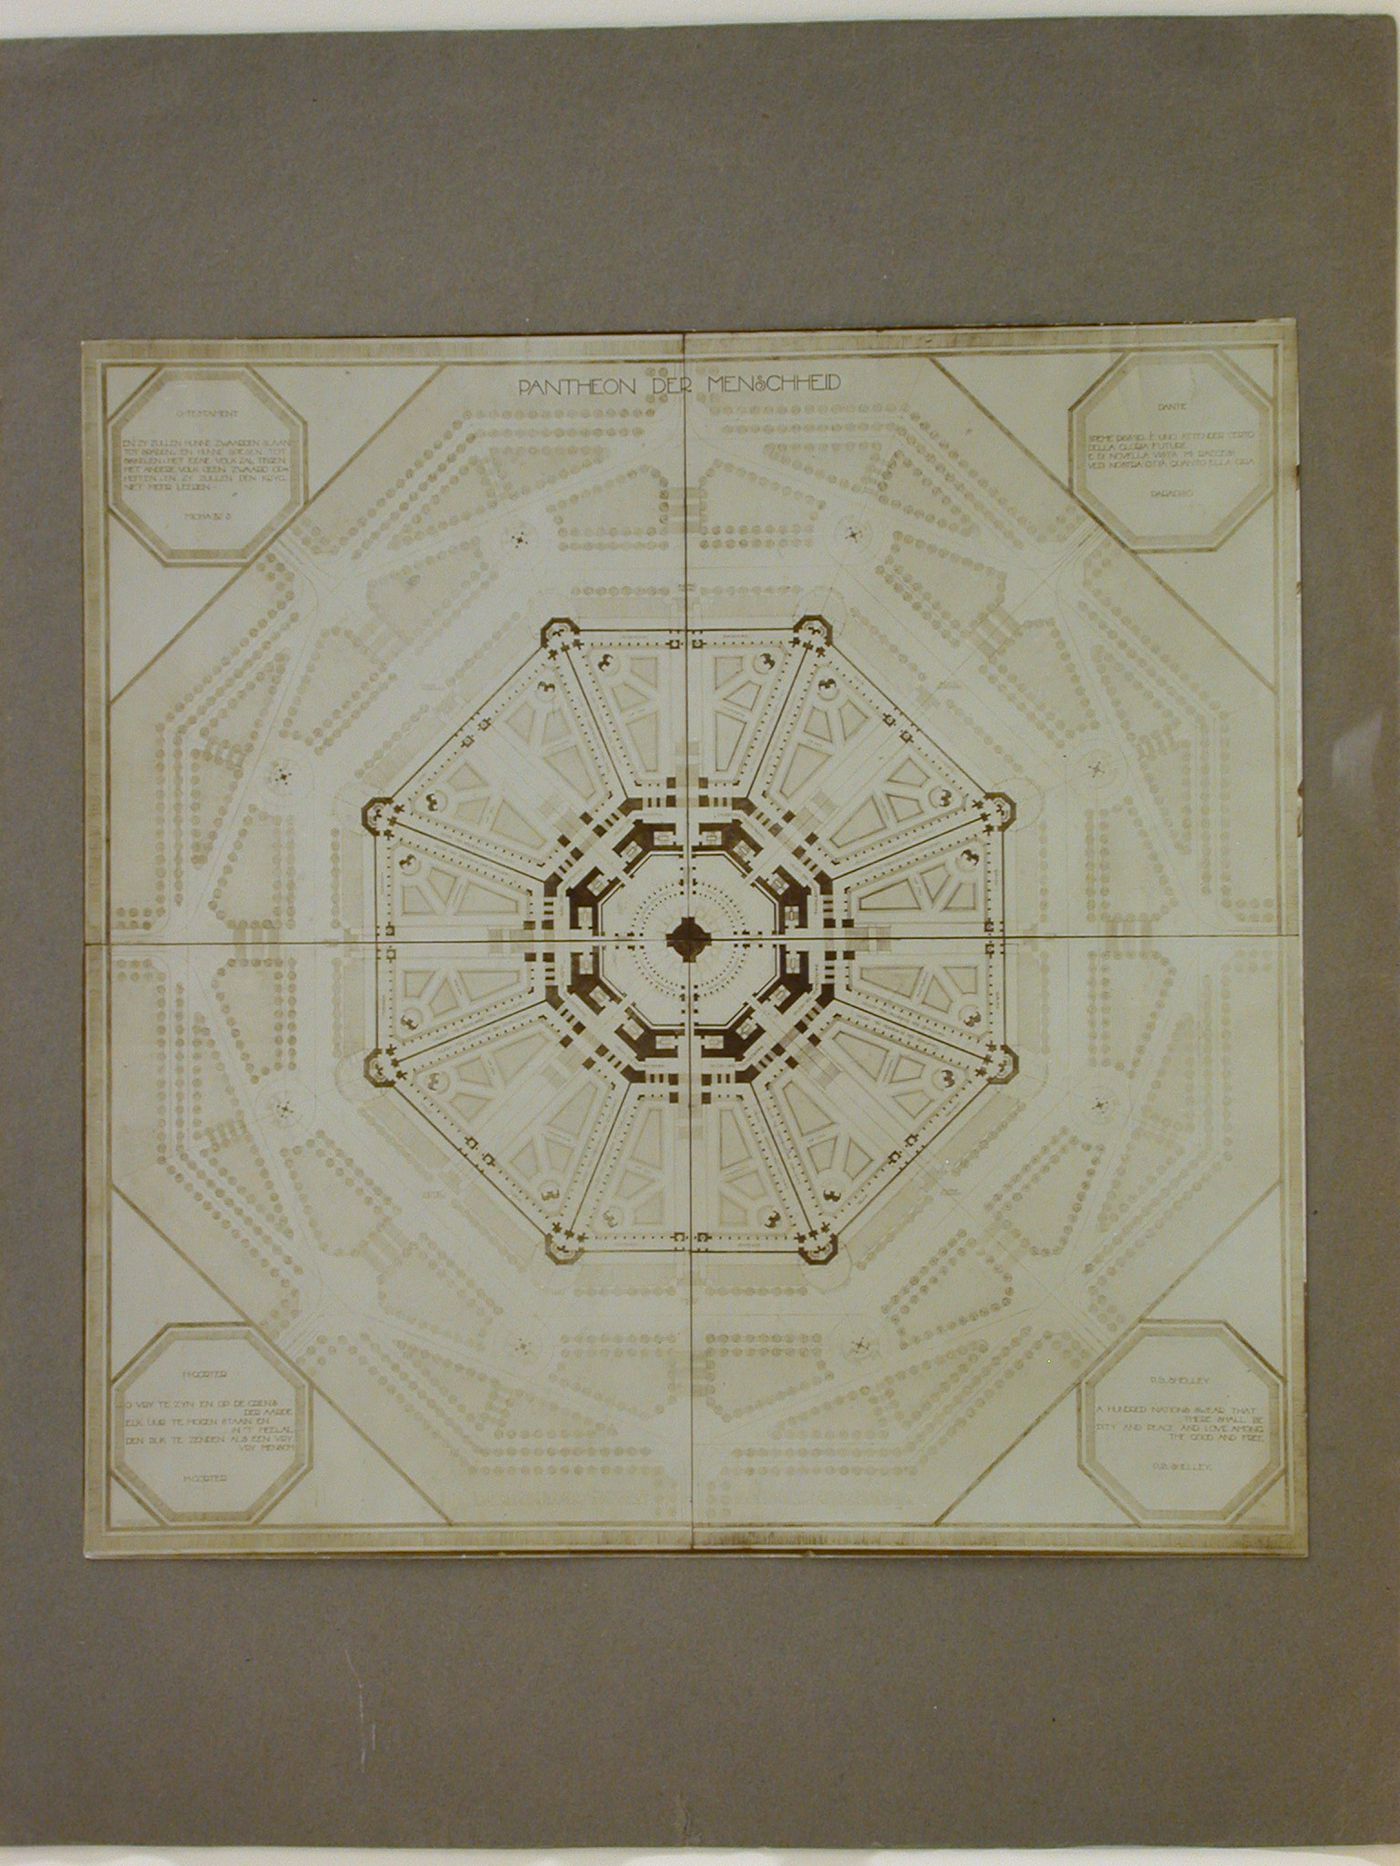 Photograph of a rendering for a floor plan of the Pantheon der Menschheid [Pantheon of Mankind] (also known as the Pantheon of Humanity), Amsterdam, Netherlands